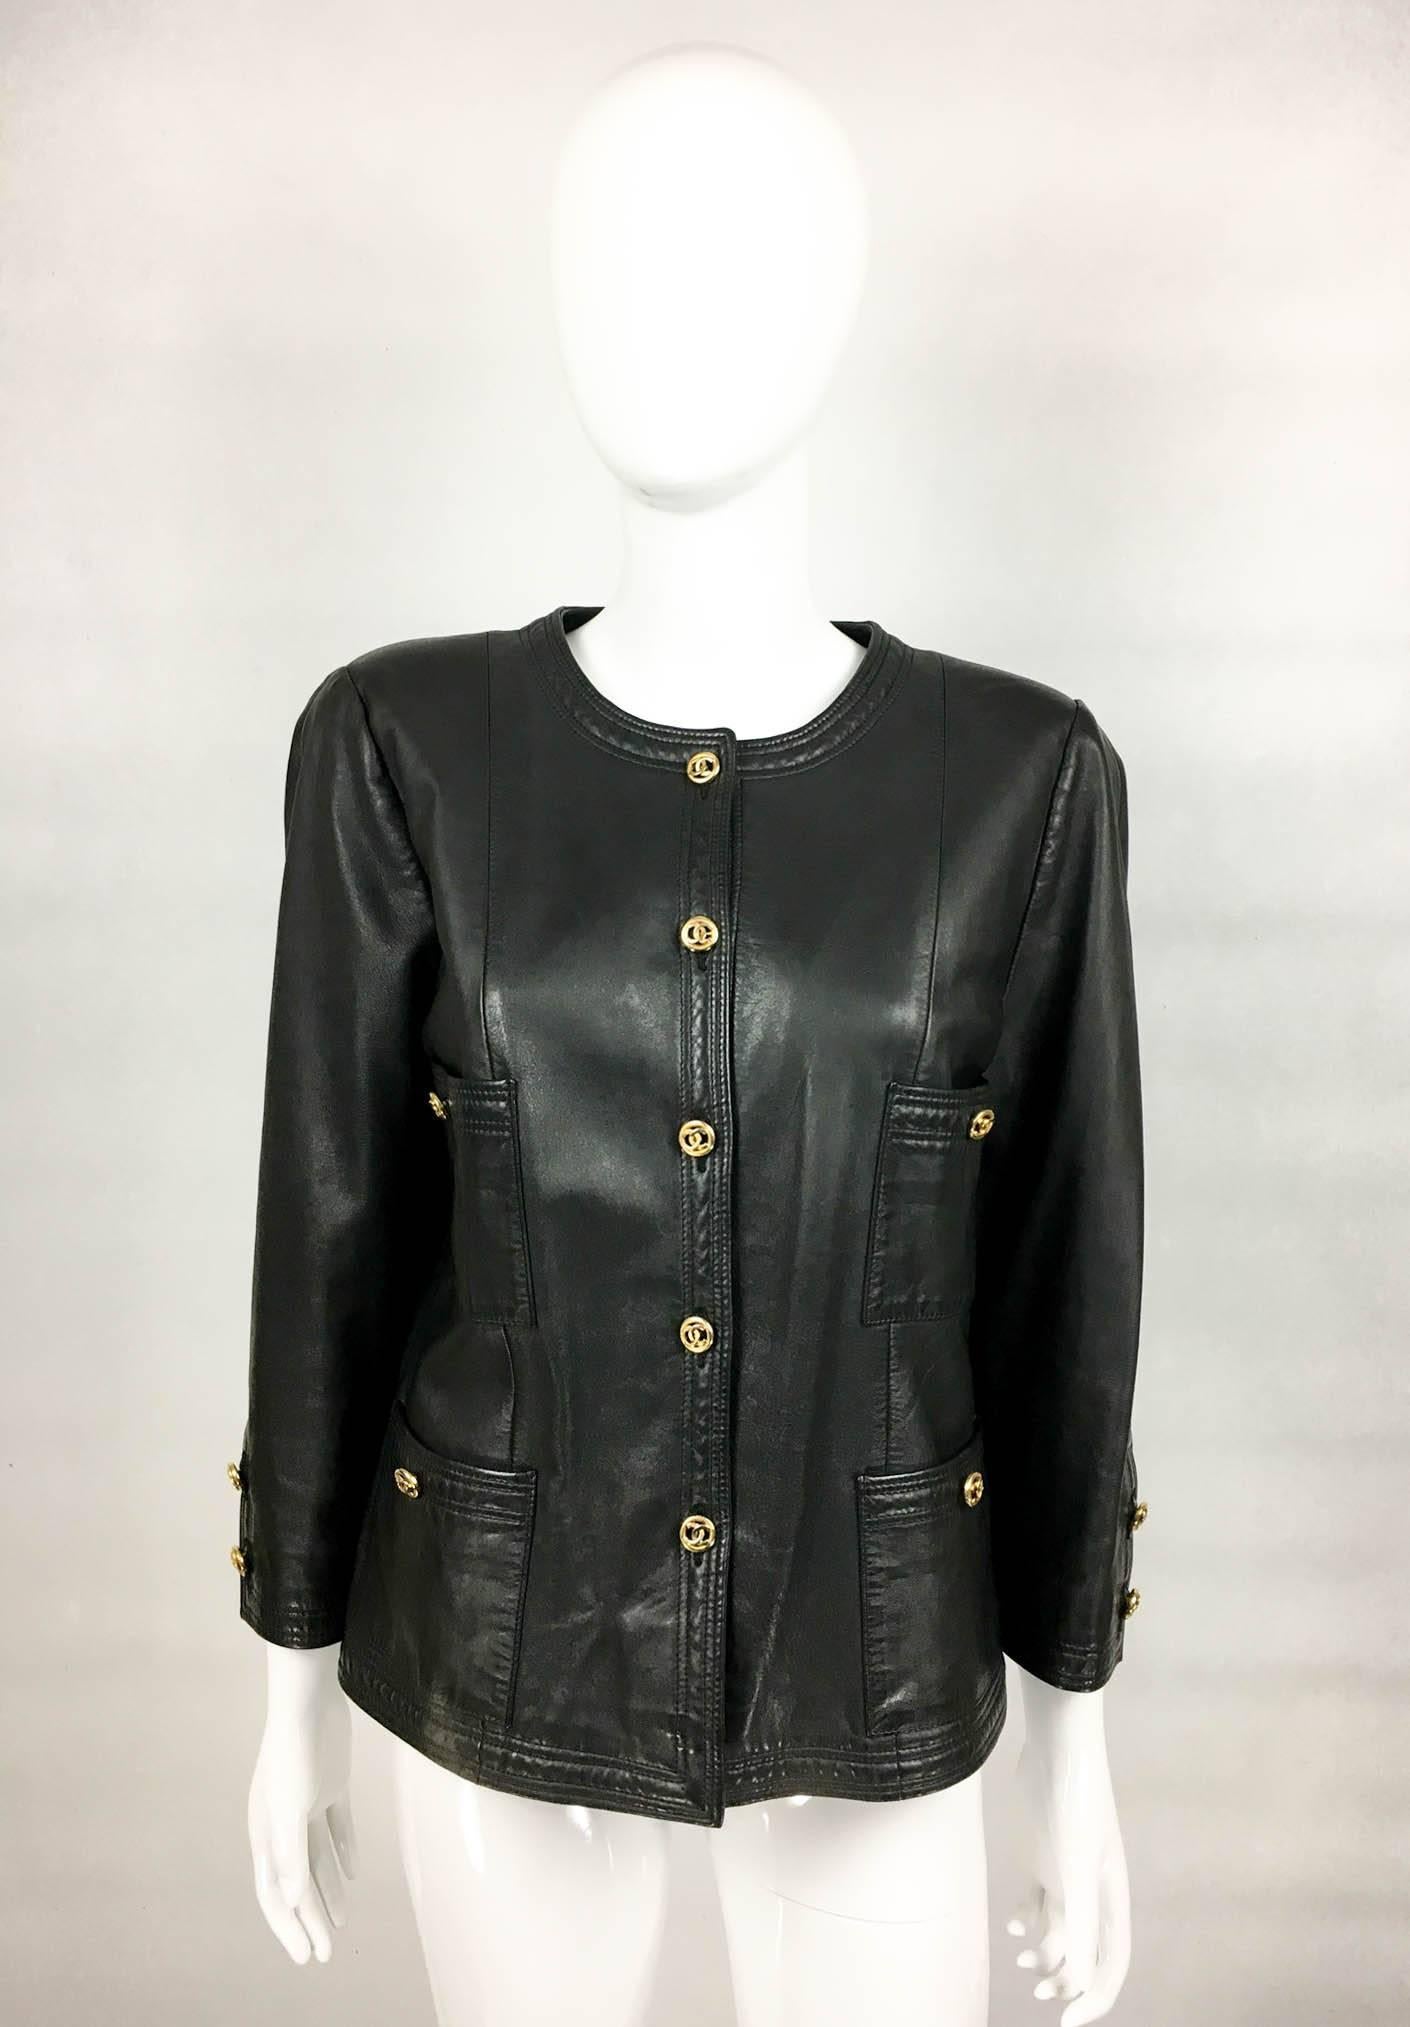 Stylish Chanel Vintage Leather Jacket. This fabulous jacket by Chanel from the 1980s is made in soft black leather. It features gilt buttons in the shape of the iconic ‘CC’ logo. There are 4 front pockets, each with a button. Collarless and boxy, it